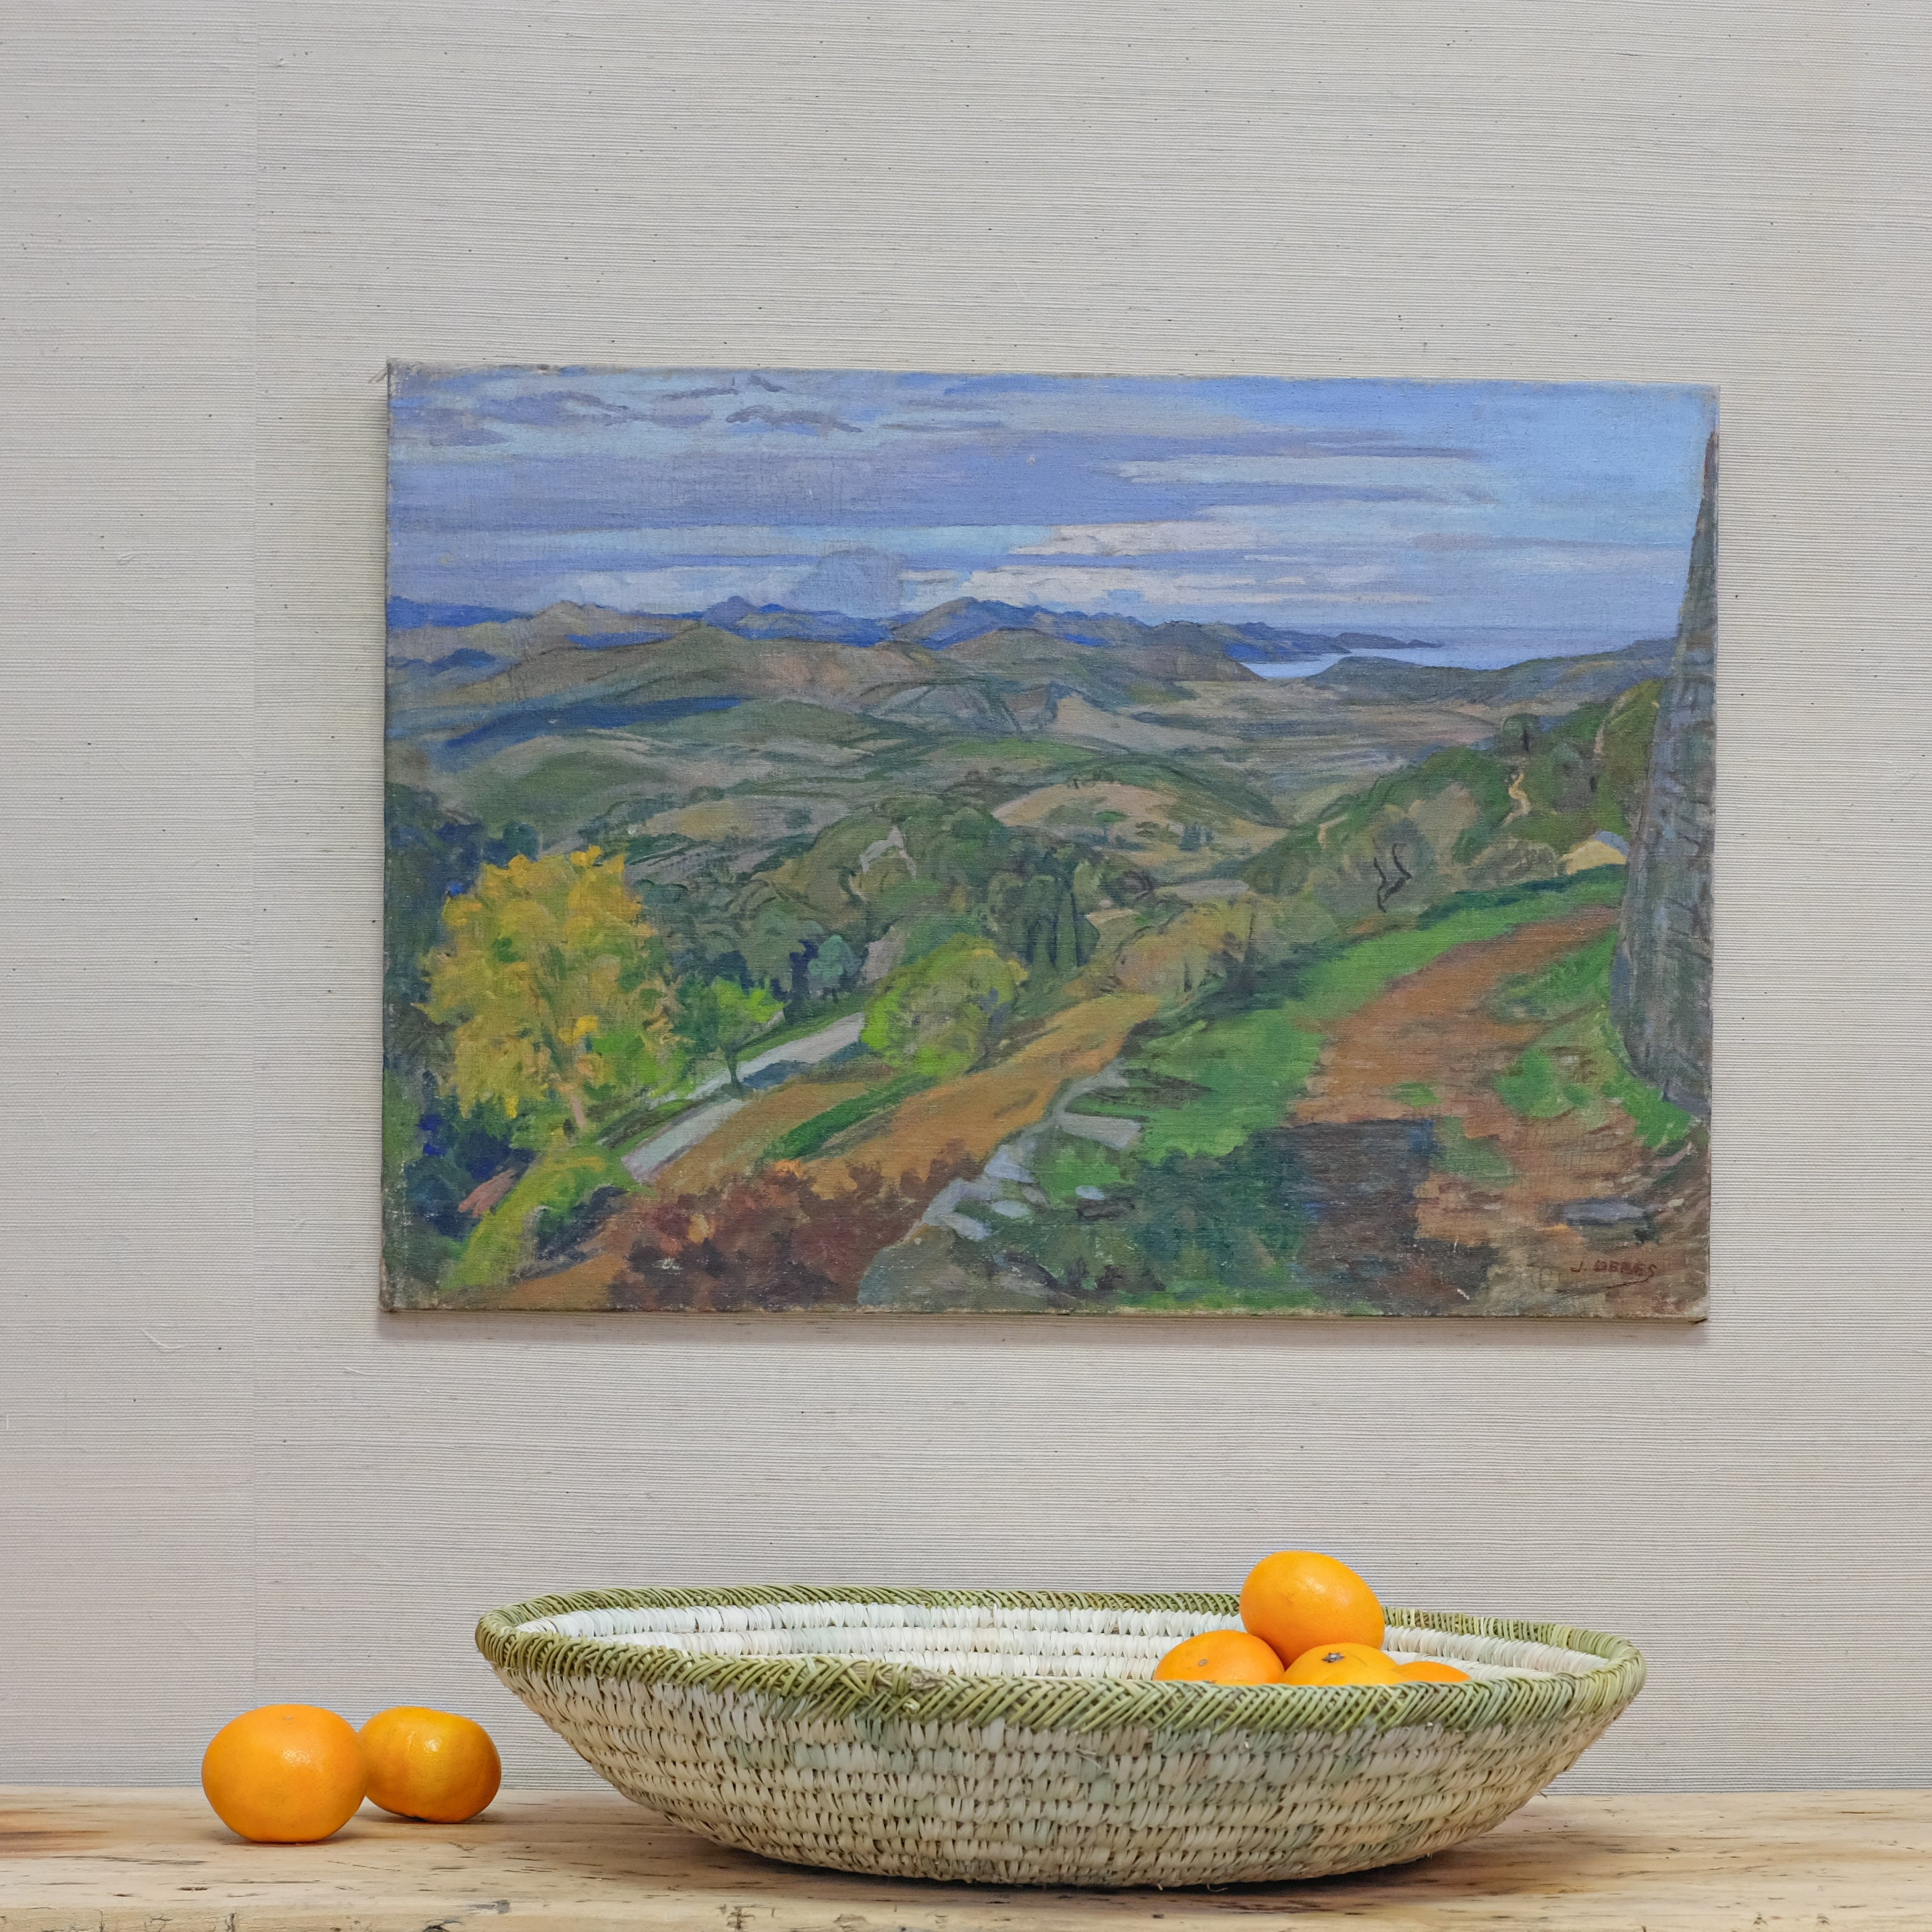 landscape oil painting hanging above low basket of tangerines